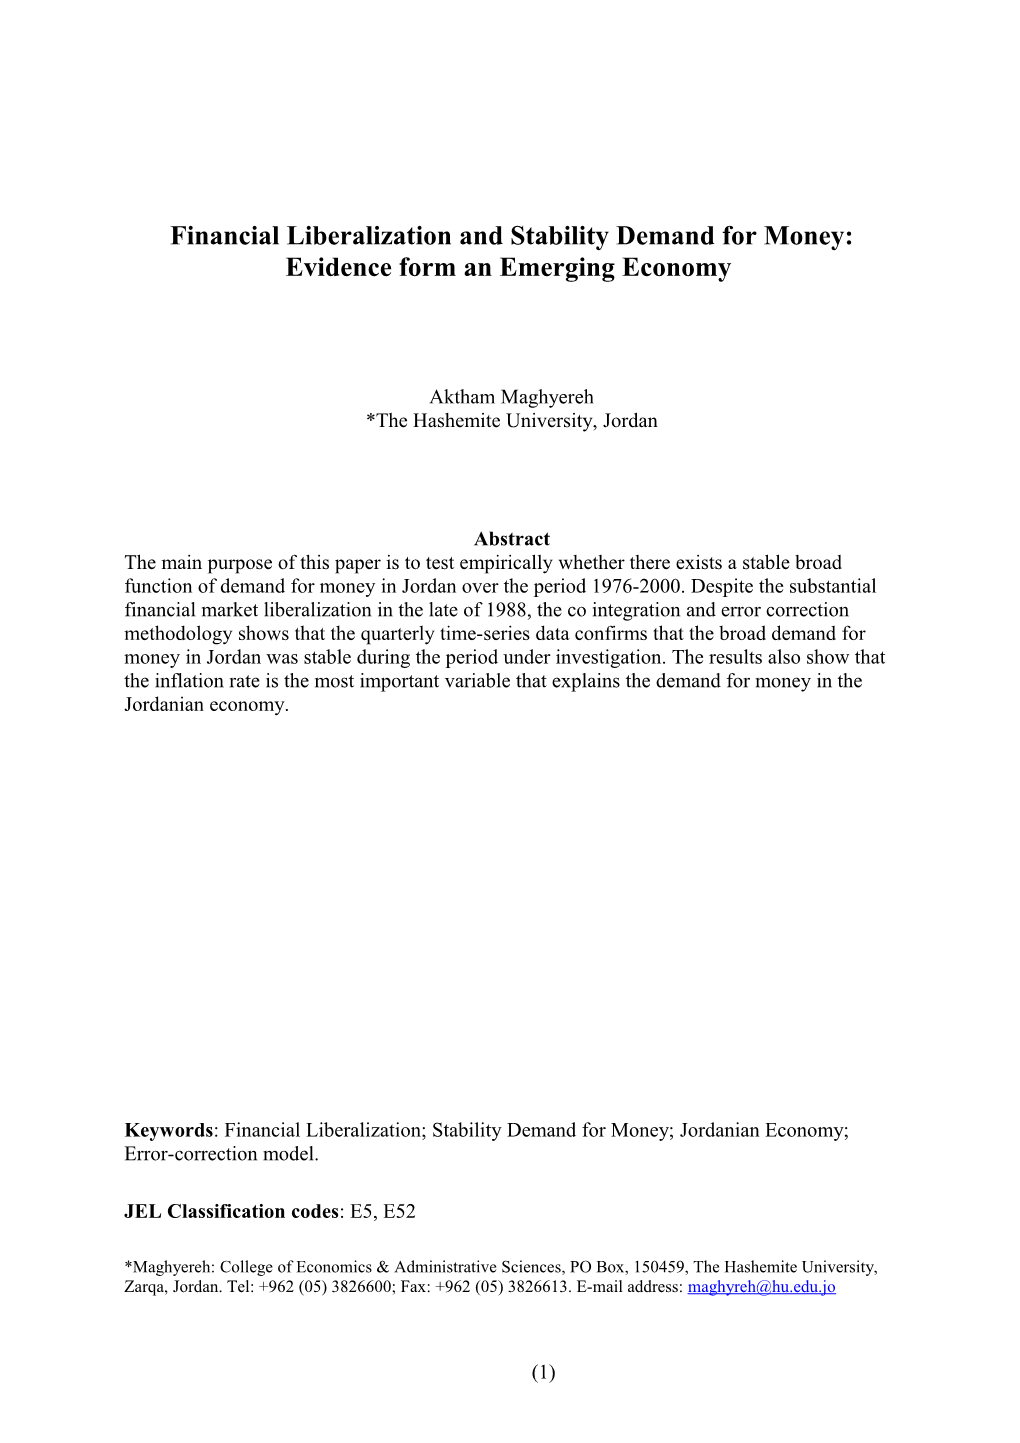 Financial Liberalization and Stabilitydemand for Money:Evidence Form an Emerging Economy